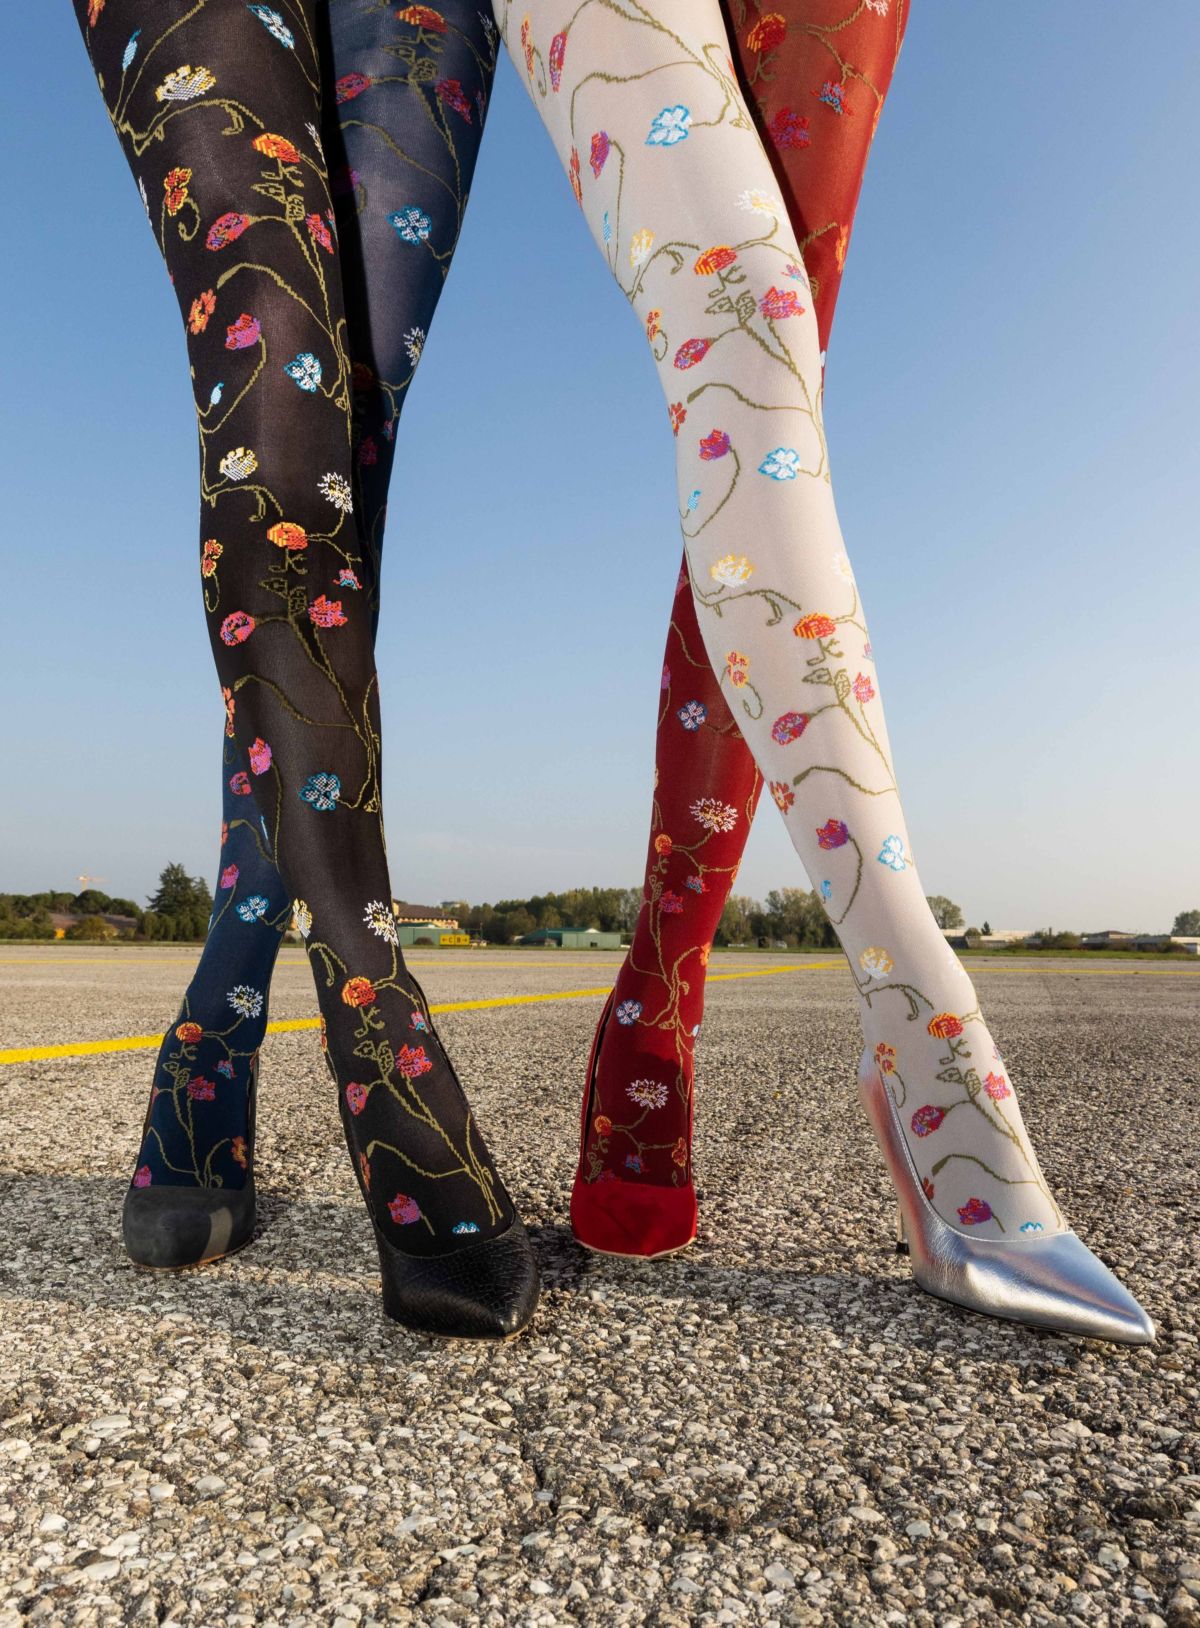 Trasparenze Platino Collant - soft opaque fashion tights with a multicoloured woven floral pattern in black, navy, maroon red and light grey.